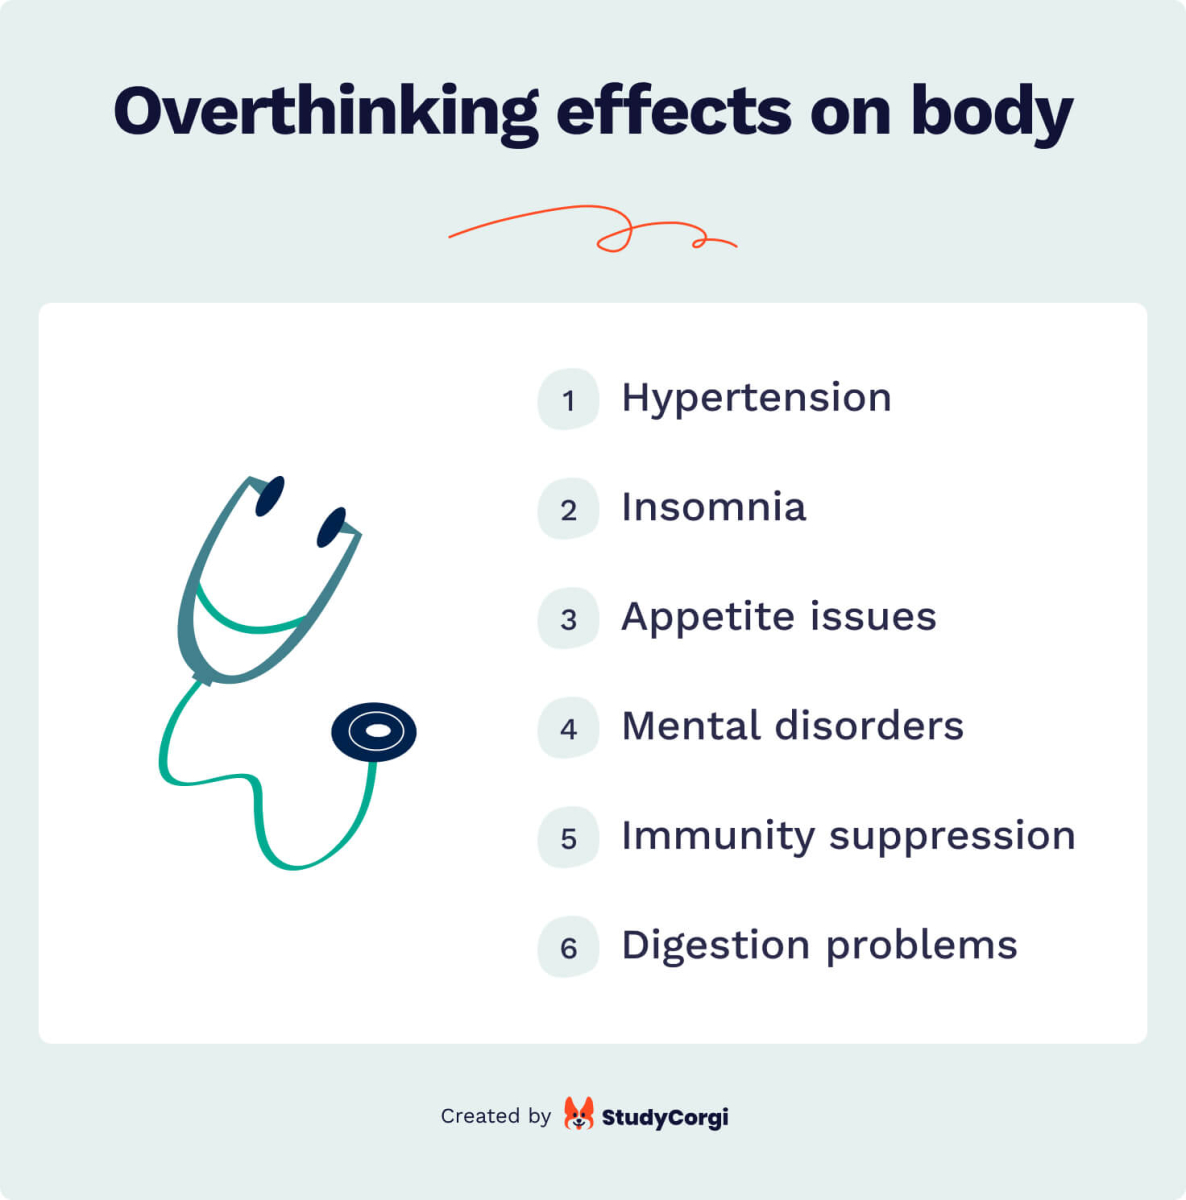 The picture lists the most harmful effects that overthinking might have on your health.